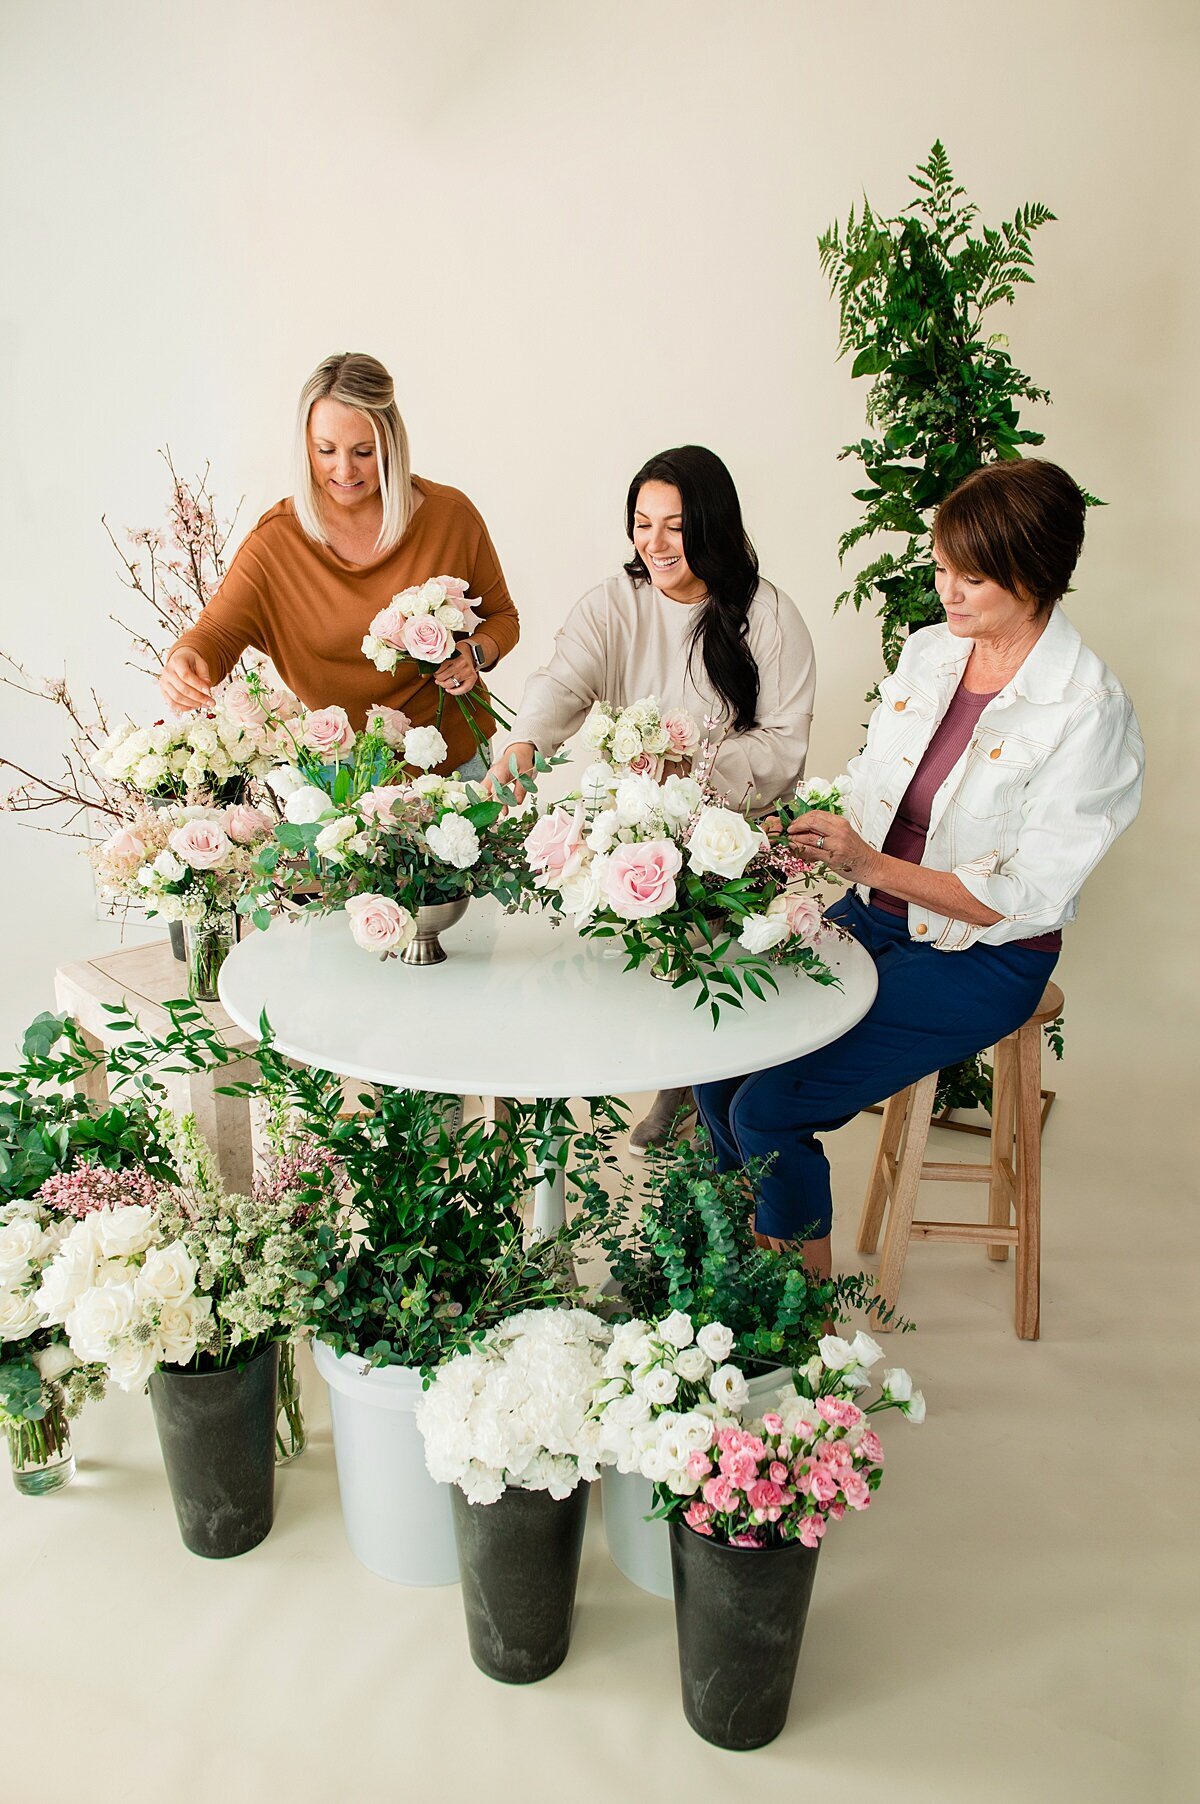 Group photo of Florists working together to put together a wedding order